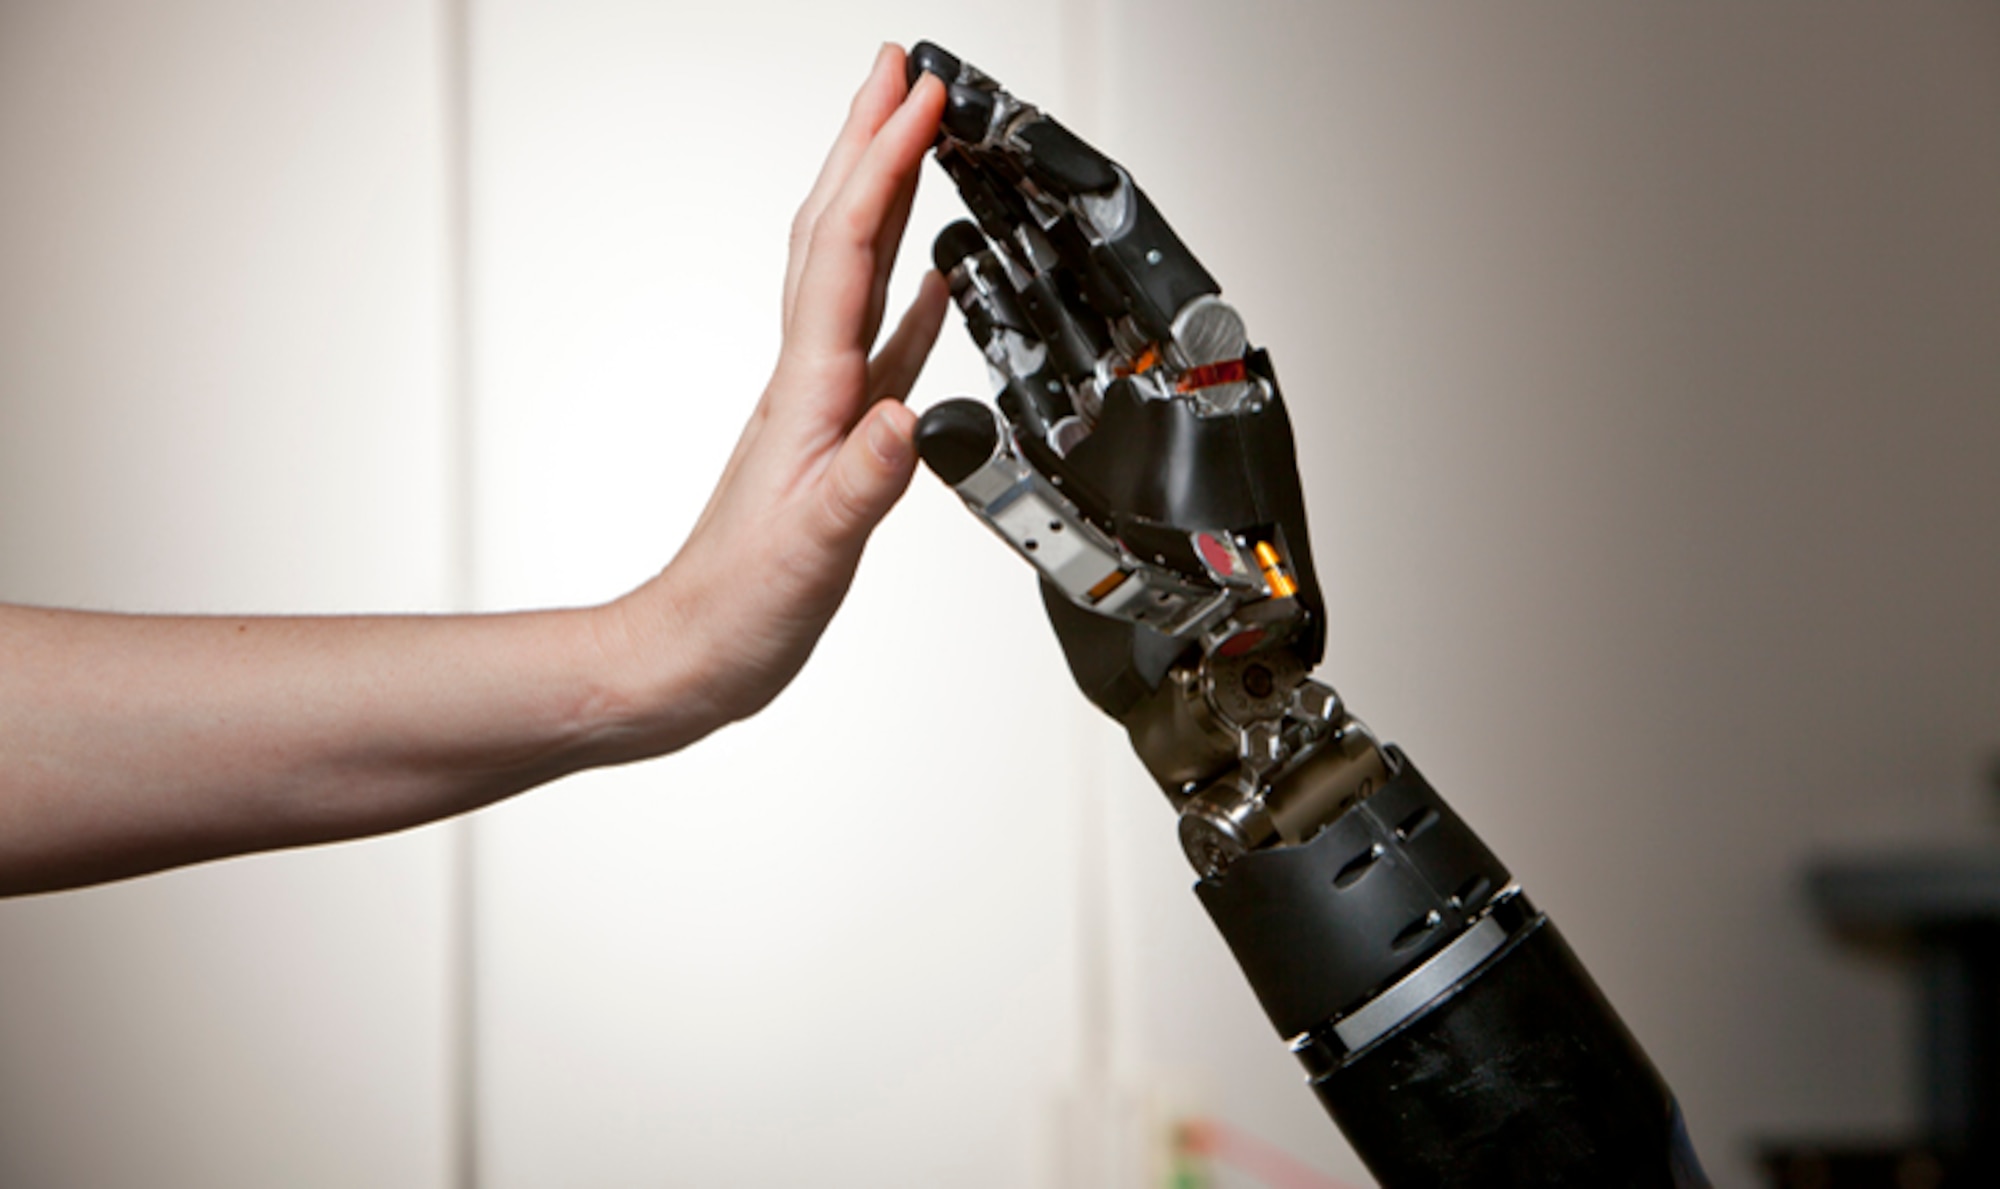 Future generations of prosthetics could include sensors that send signals back to the brain so amputees can feel with their artificial fingers. Photo courtesy Defense Advanced Research Projects Agency/Johns Hopkins University Applied Physics Laboratory (DARPA/JHUAPL).